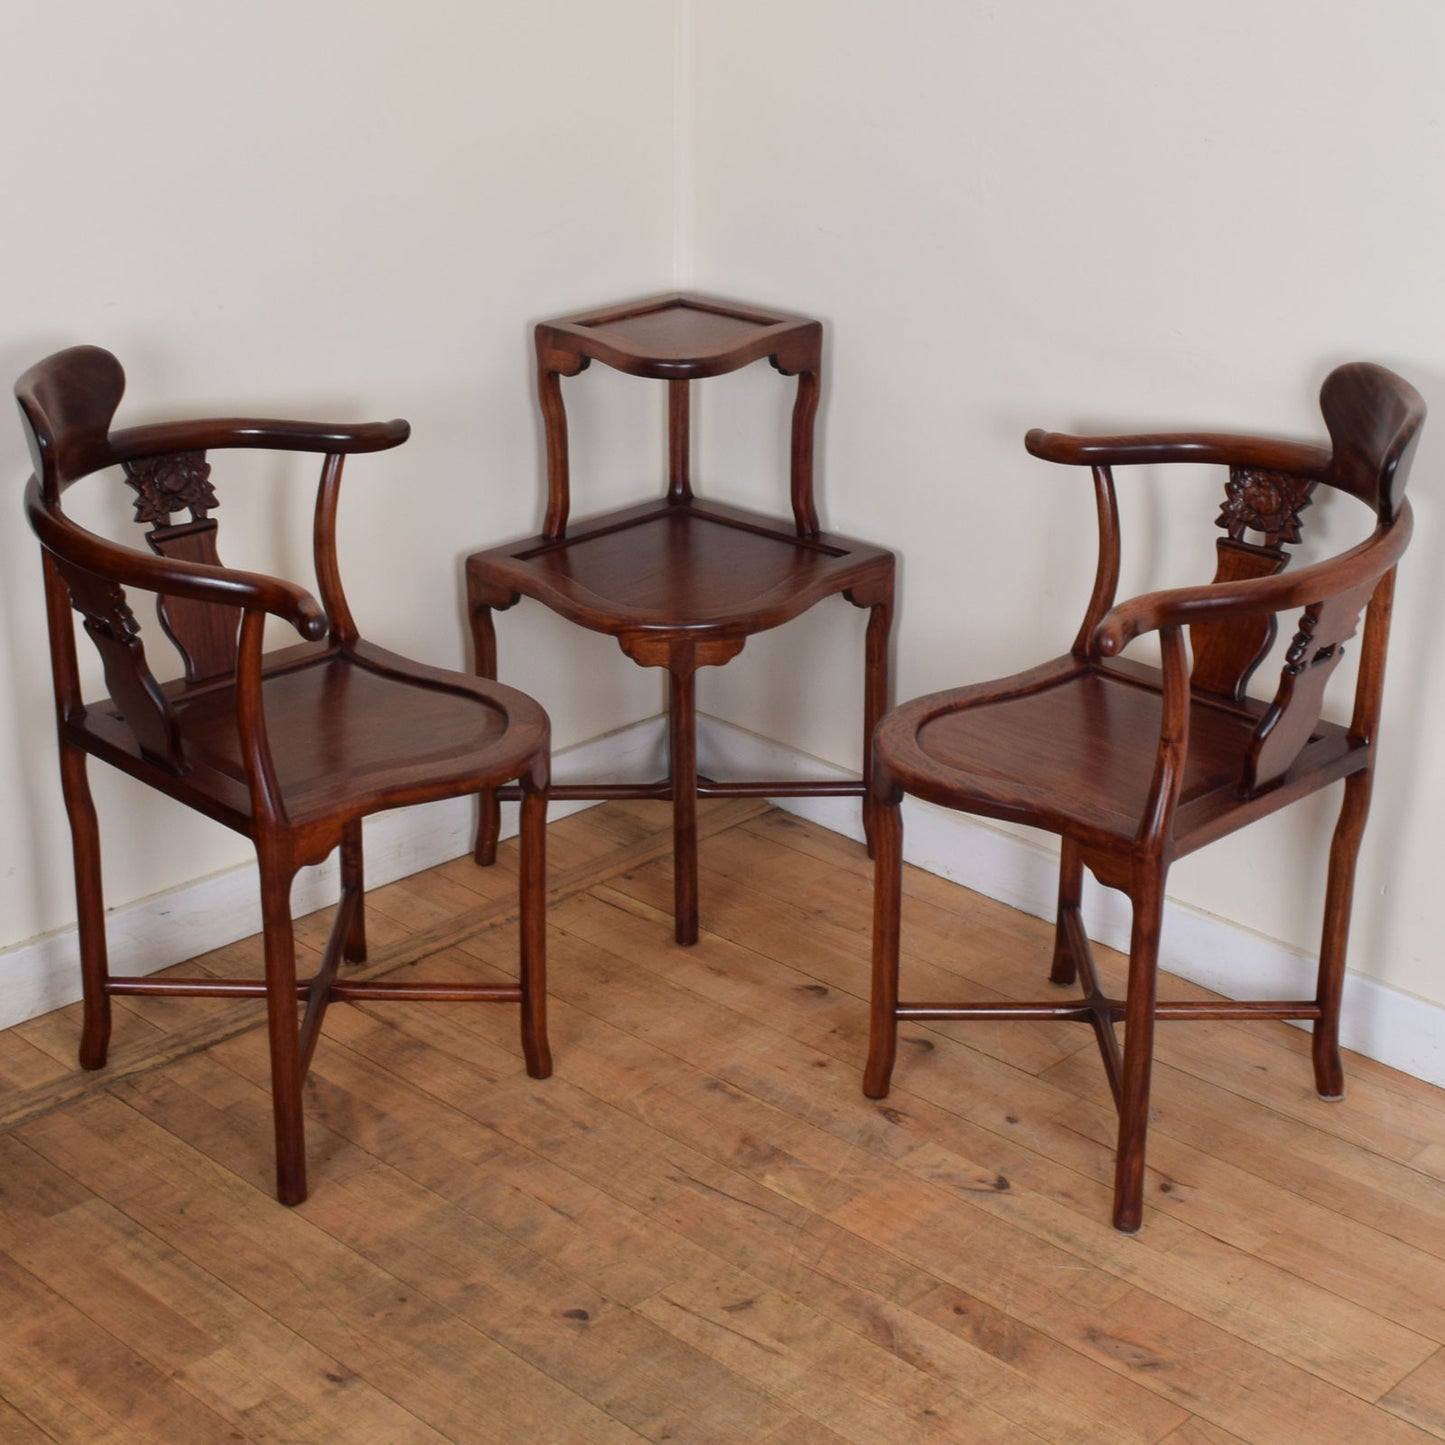 Corner chairs with table